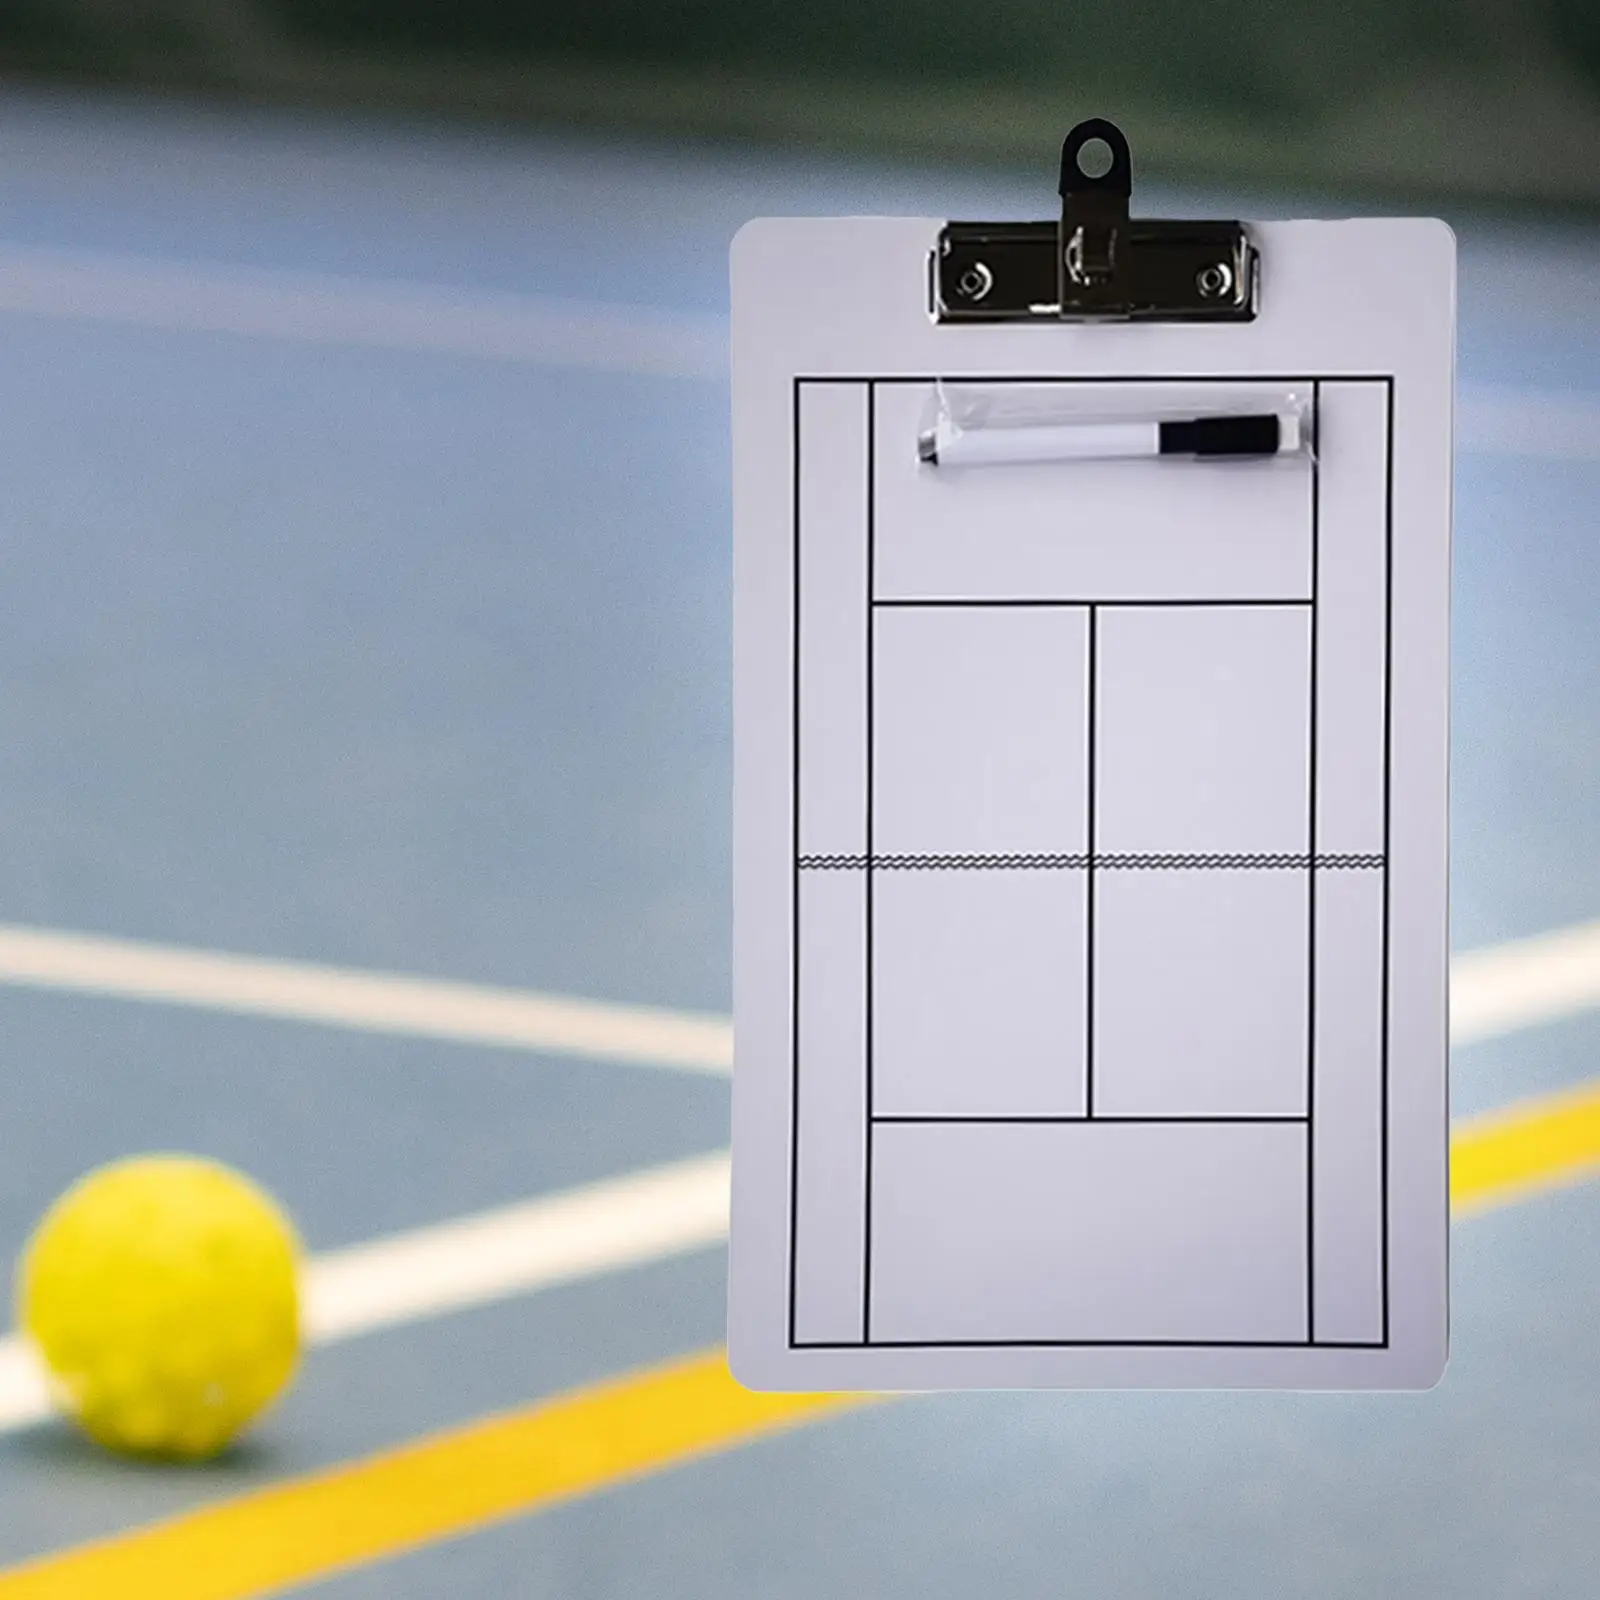 Tennis Coaching Boards Strategy Tactic Clipboard Professional 35x22cm Display Board Game Game Plan Demonstration Tactic Board